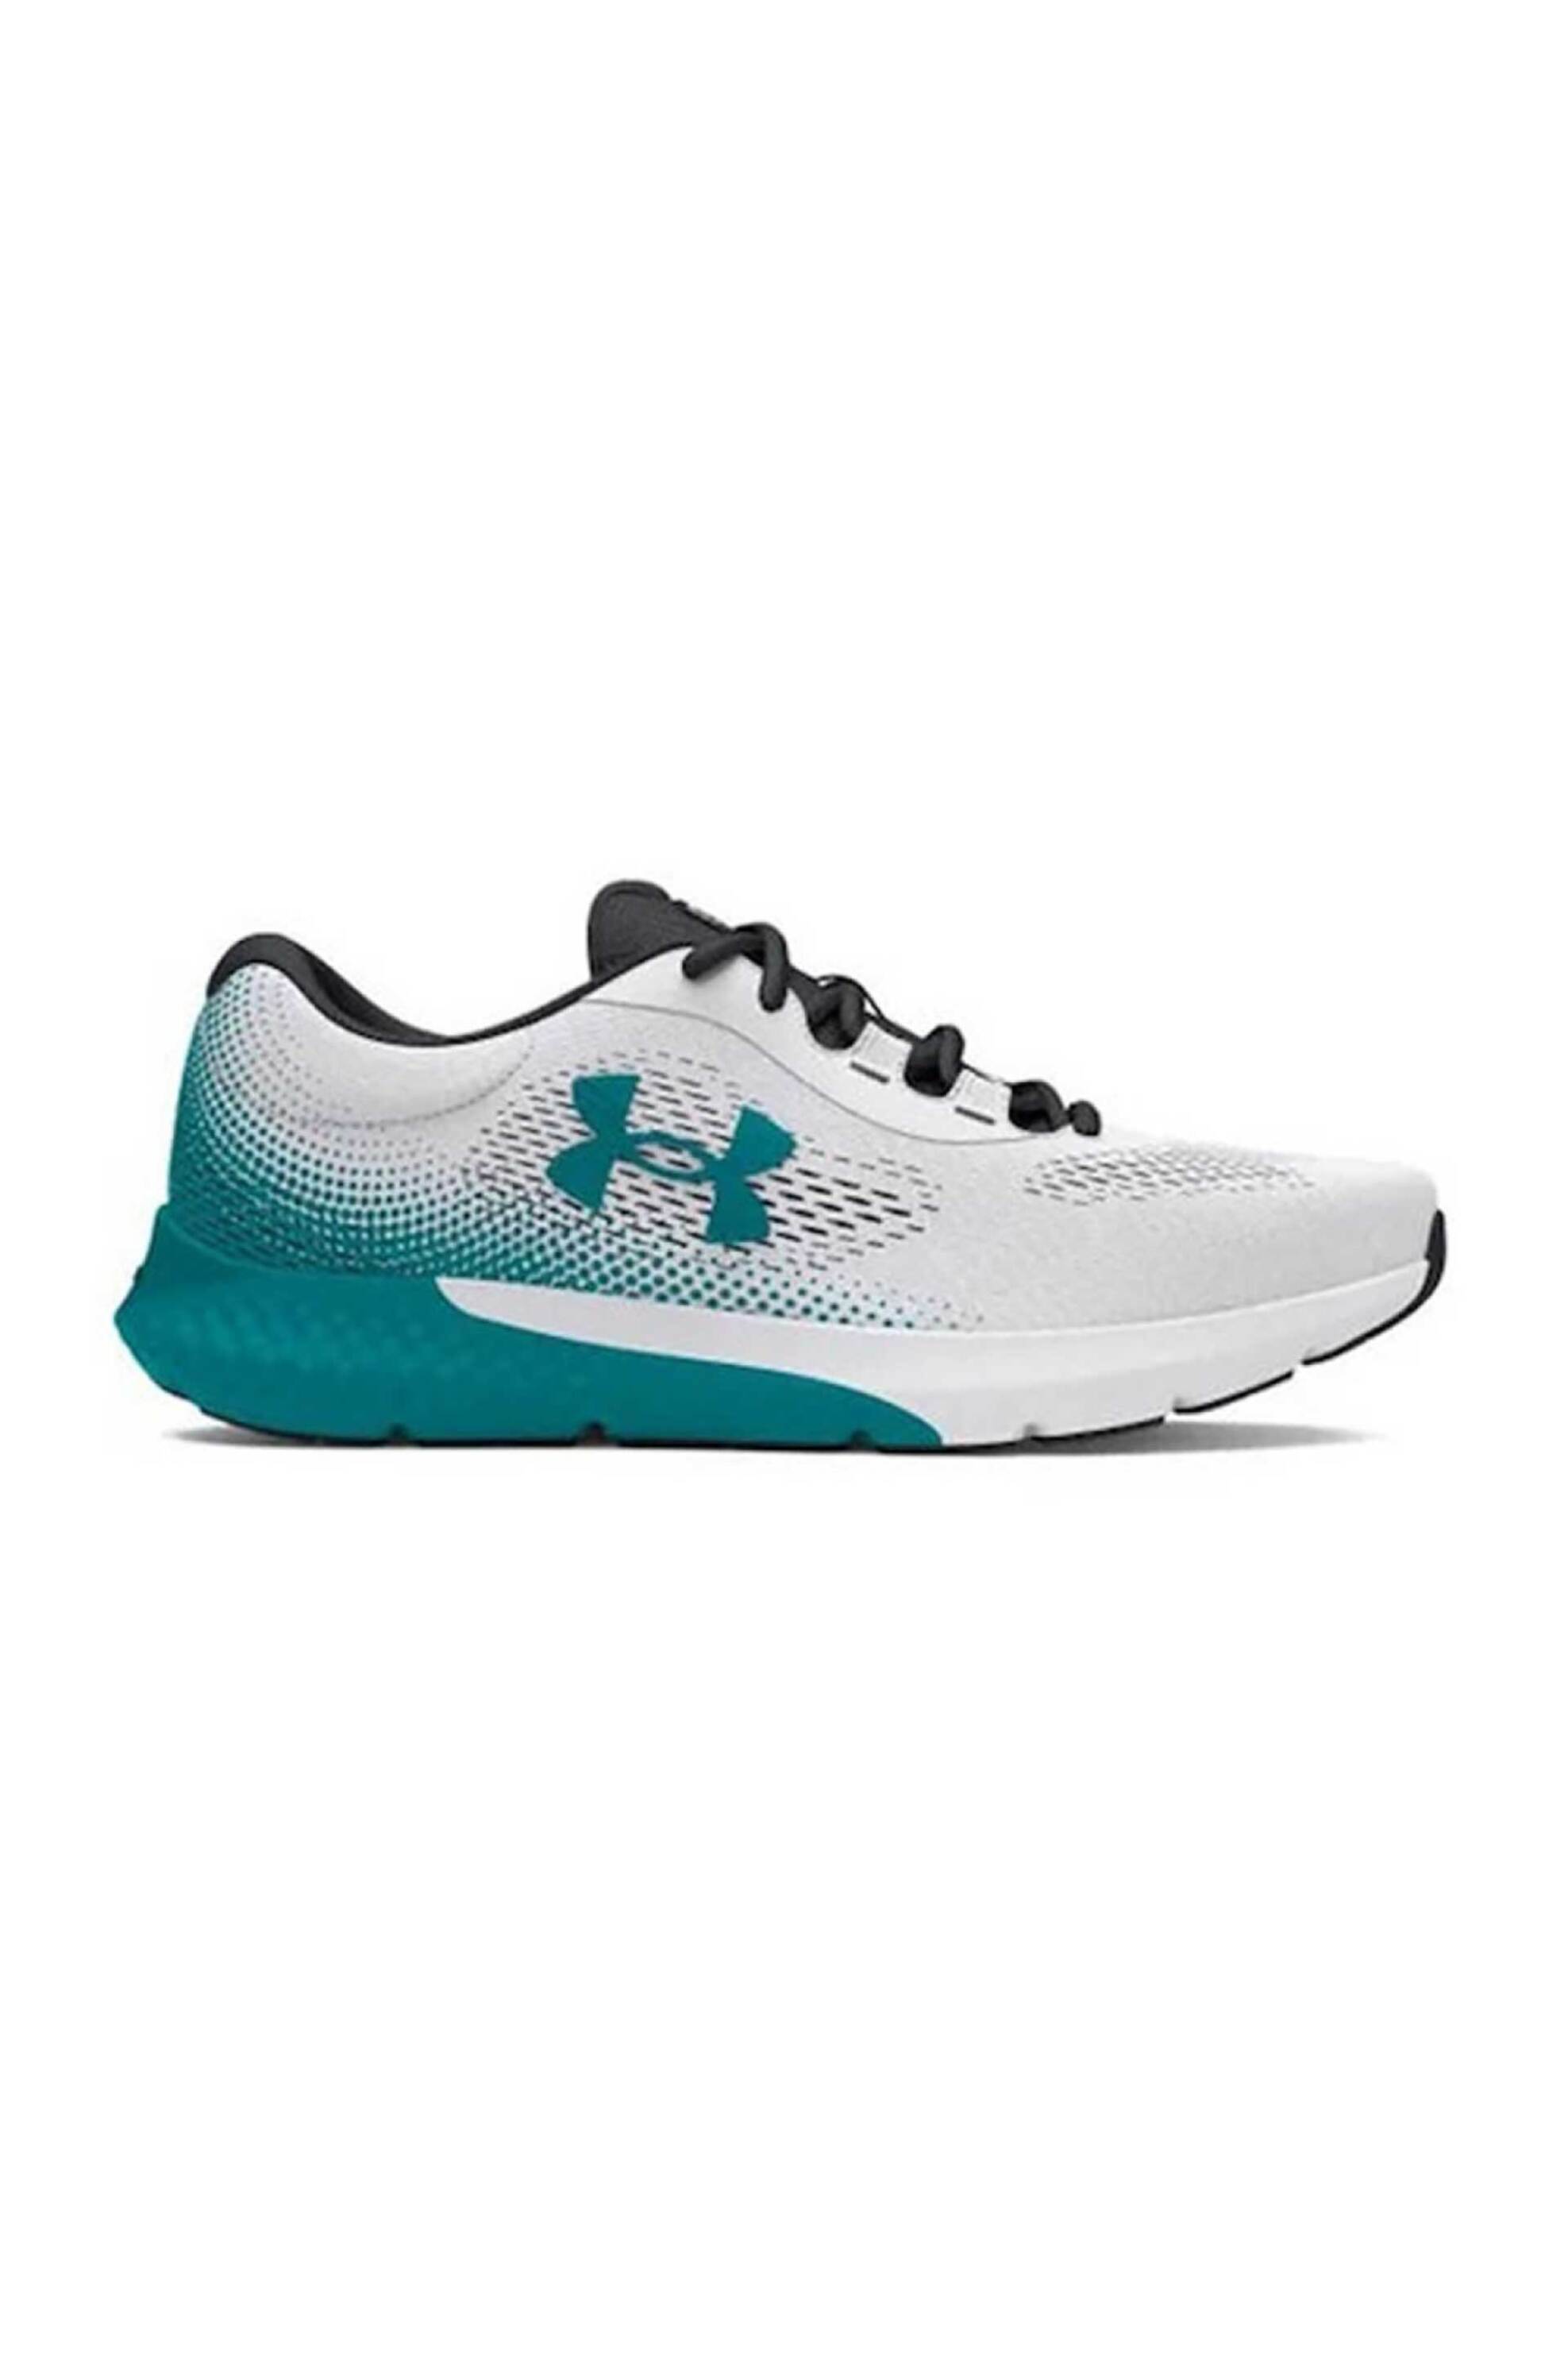 Under Armour ανδρικά αθλητικά παπούτσια running “Charged Rogue 4” – 3026998 Λευκό